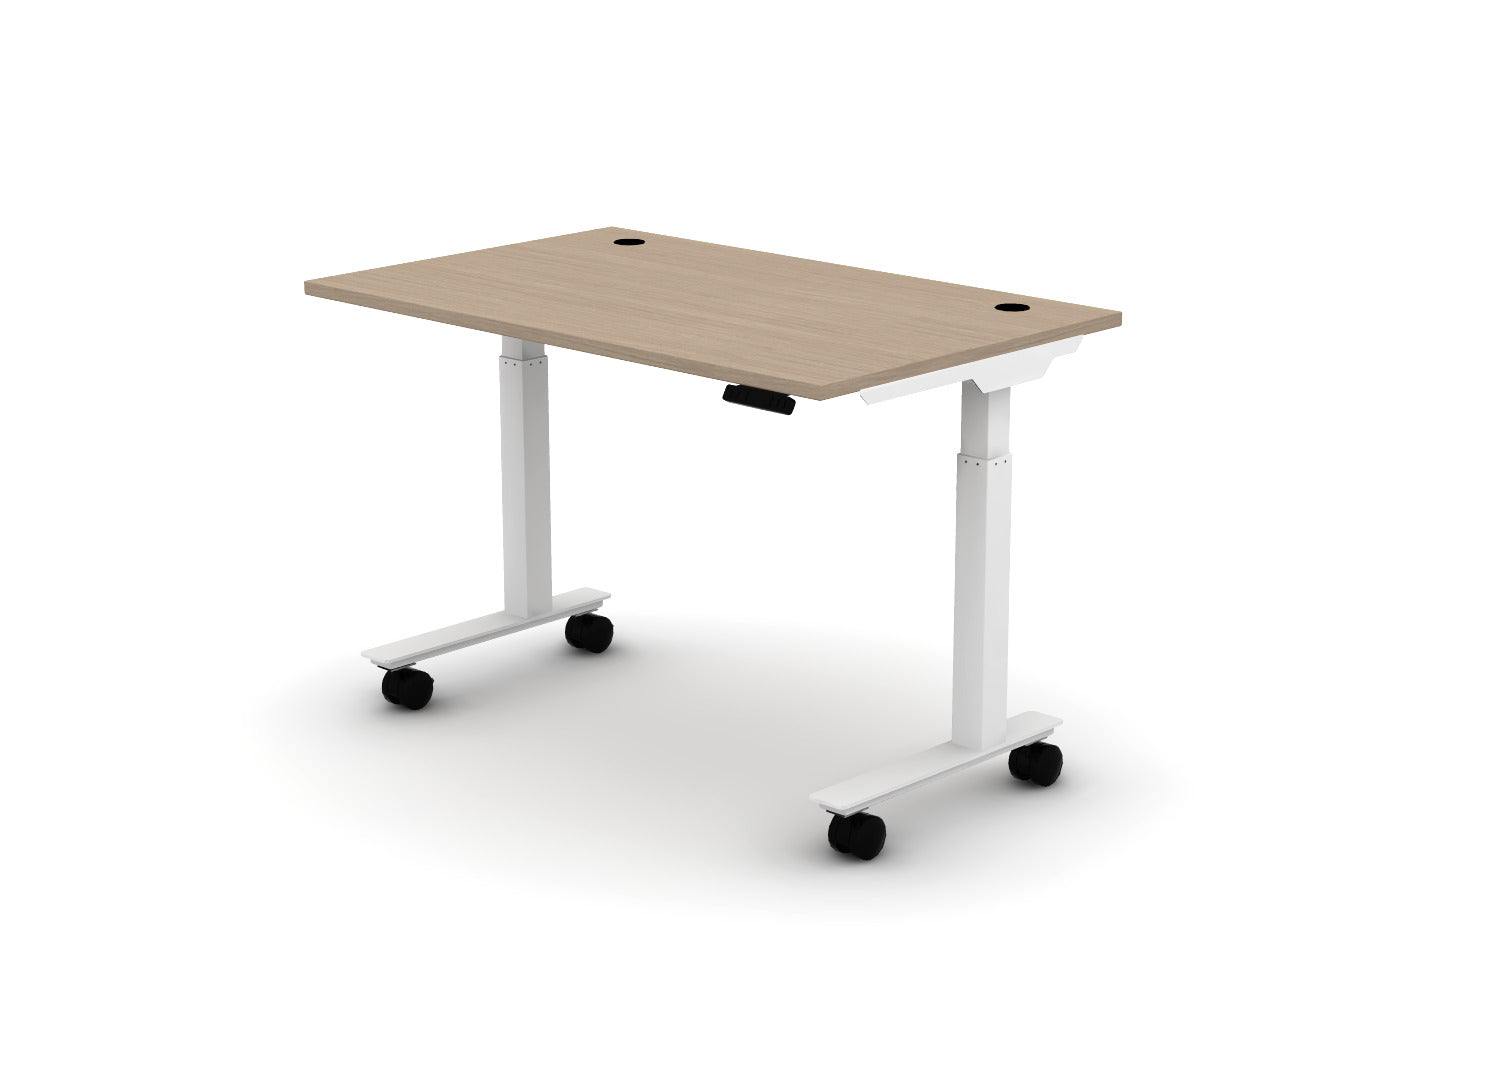 Mobile Think Desk (sit to stand)